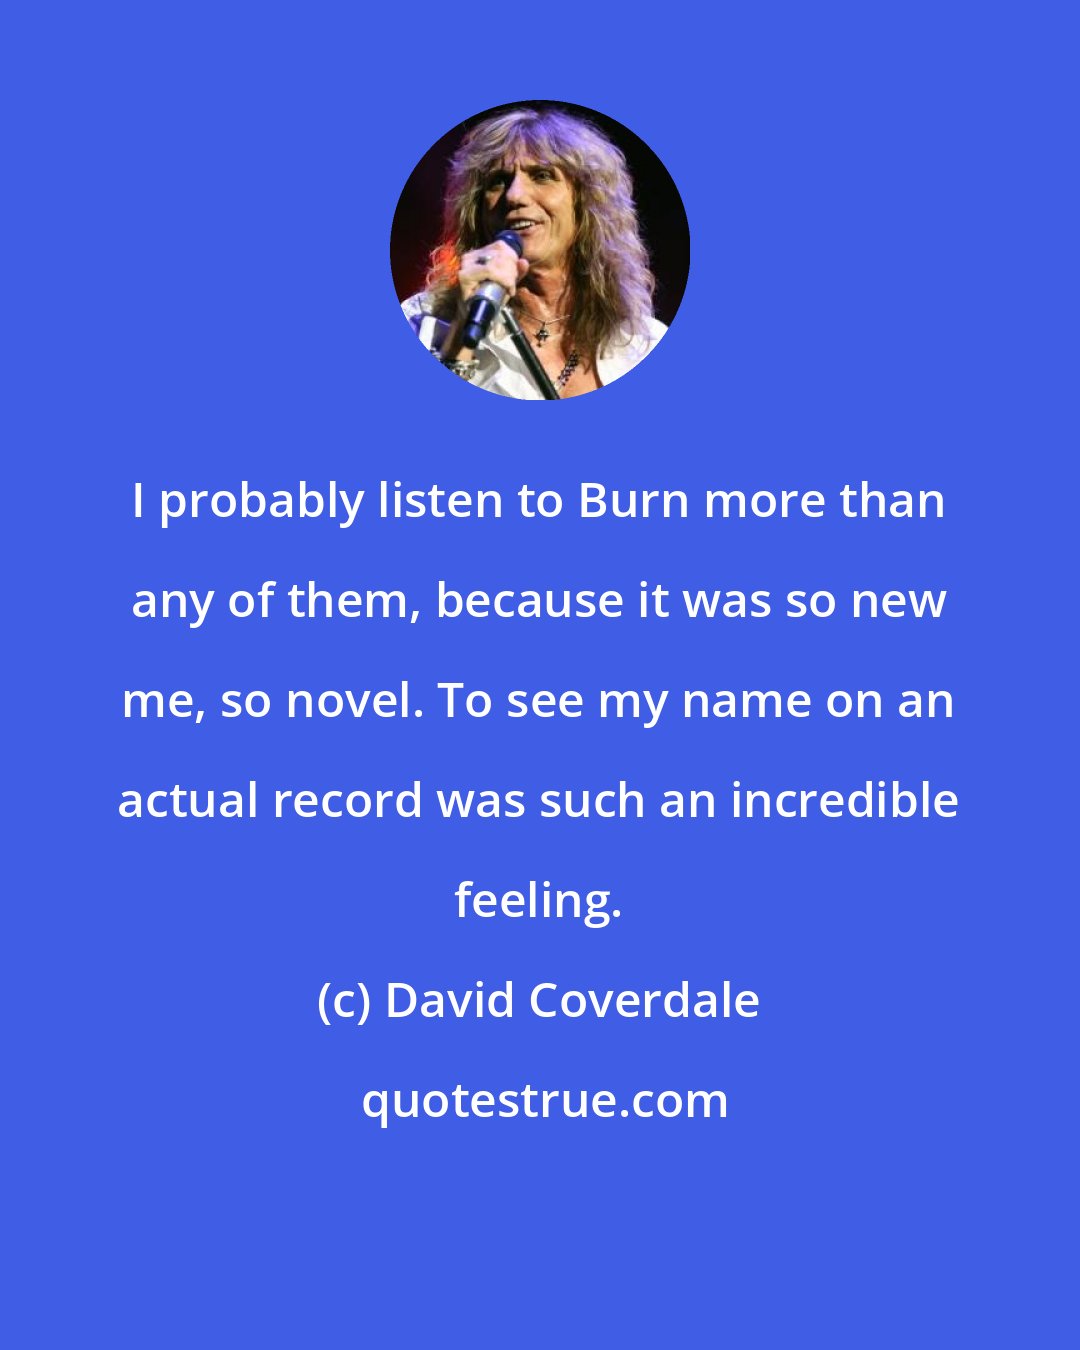 David Coverdale: I probably listen to Burn more than any of them, because it was so new me, so novel. To see my name on an actual record was such an incredible feeling.